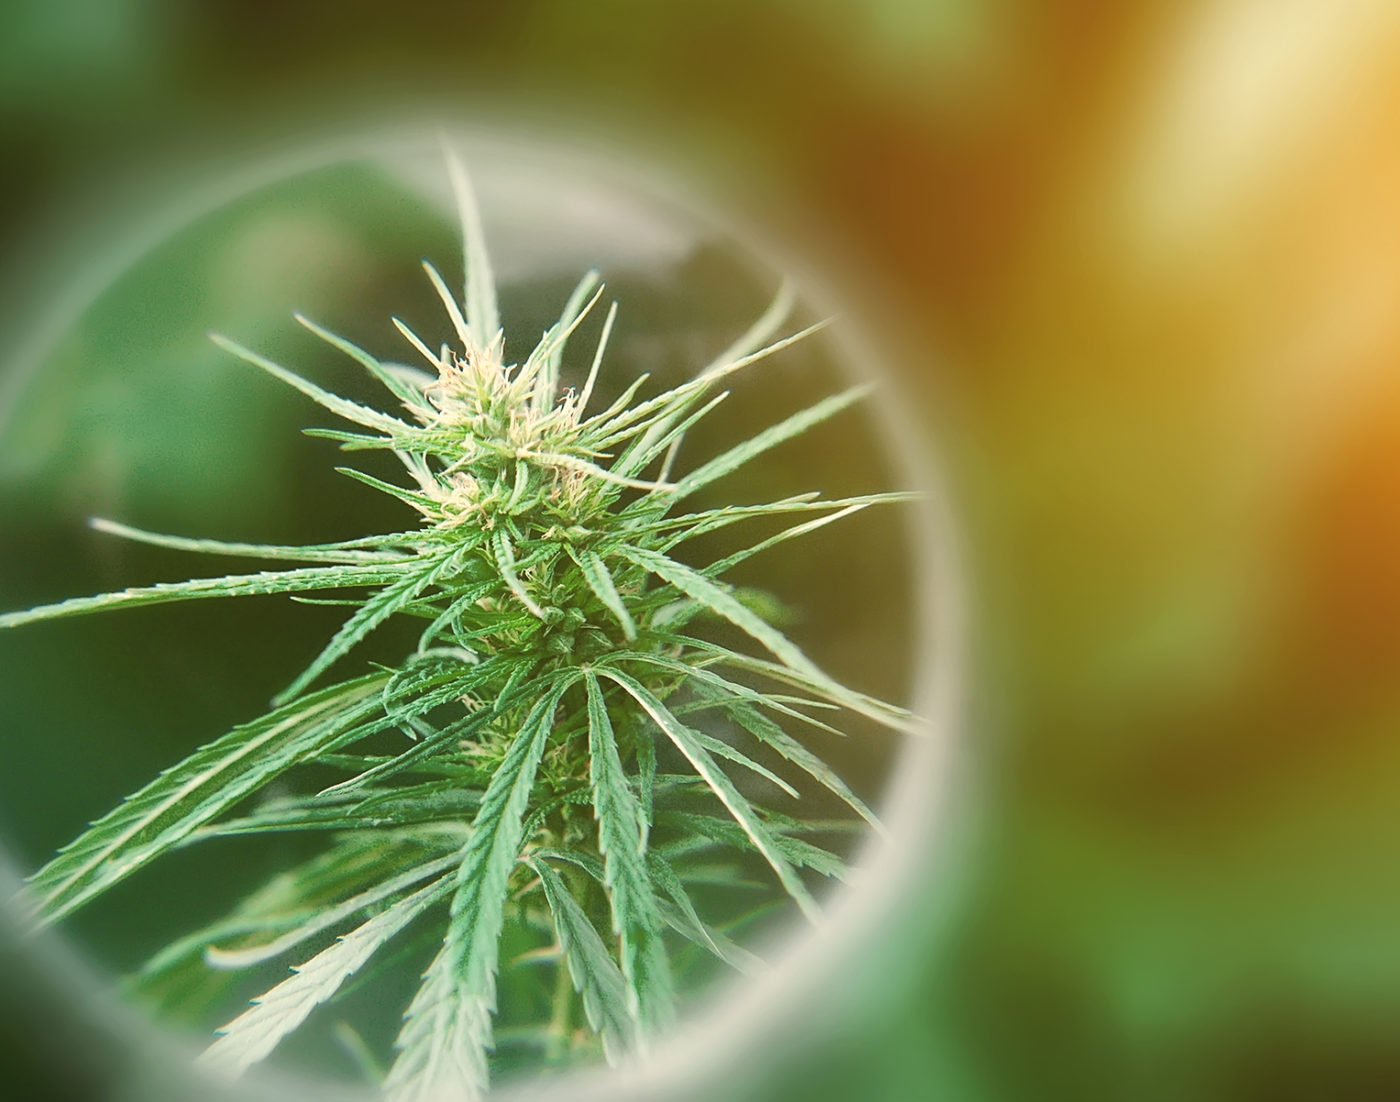 The Major Role for Minor Cannabinoids